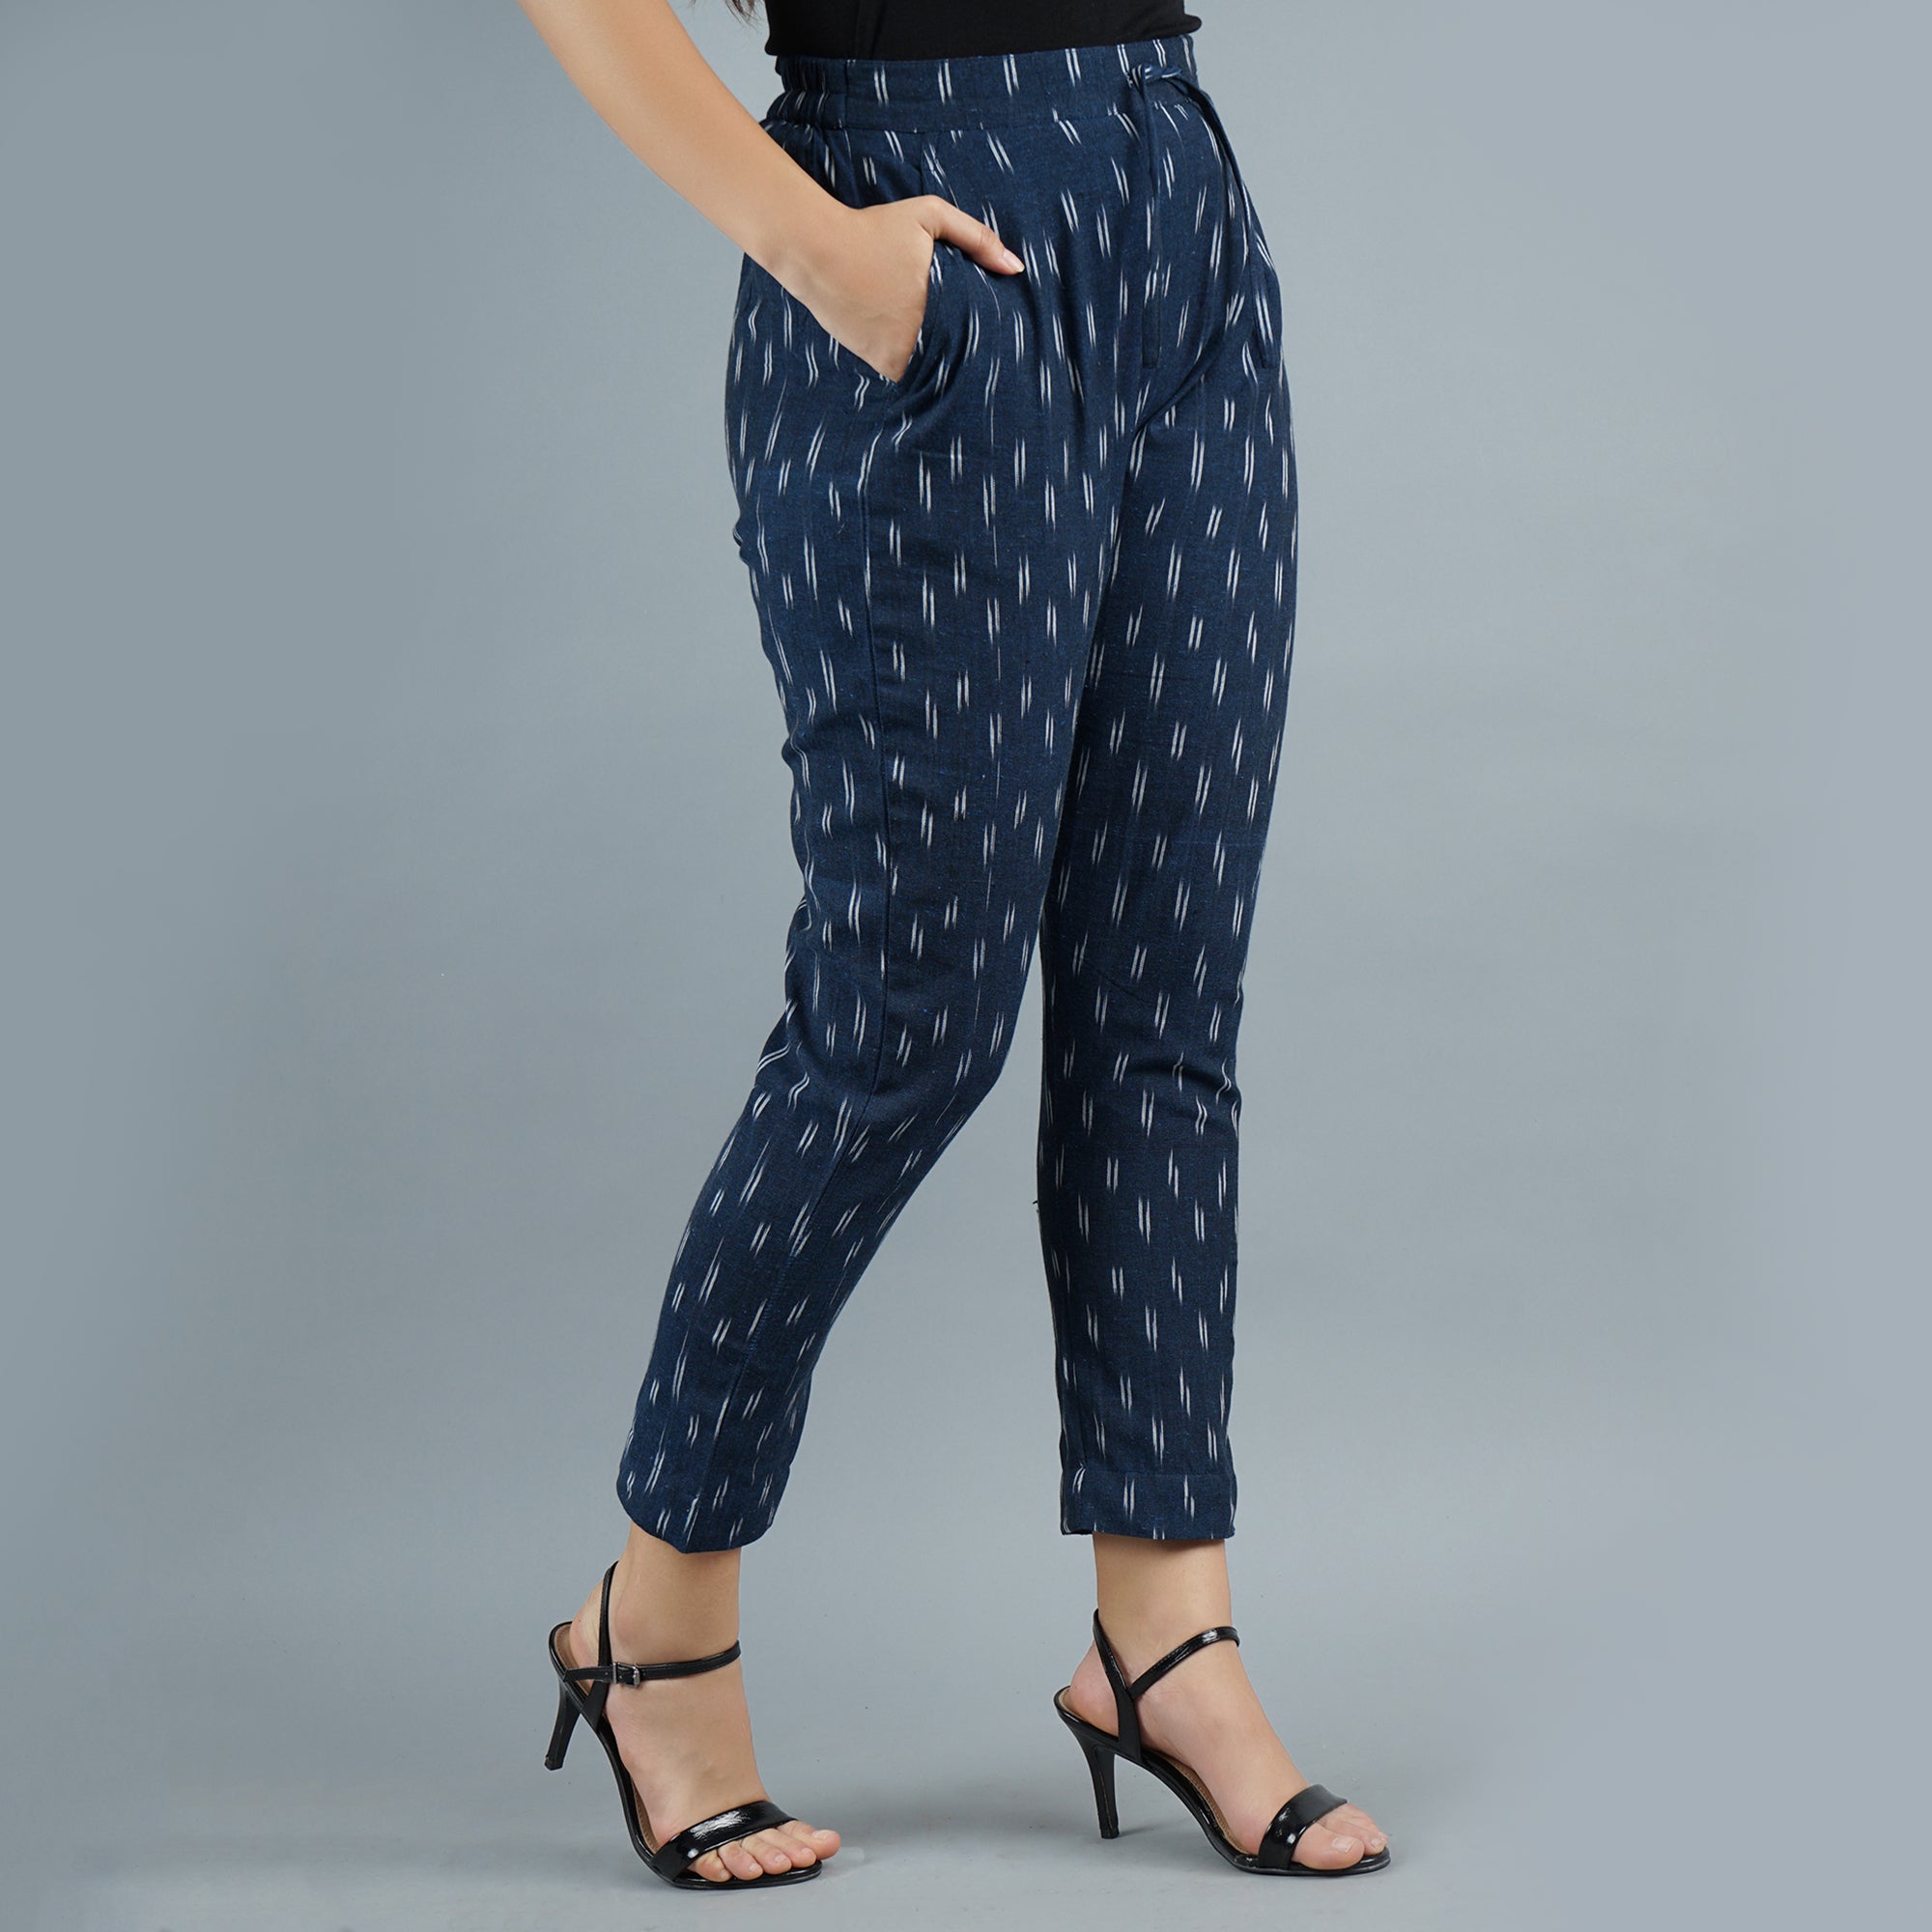 Buy Women Straight Trouser Navy Blue Solid Cotton for Best Price, Reviews,  Free Shipping